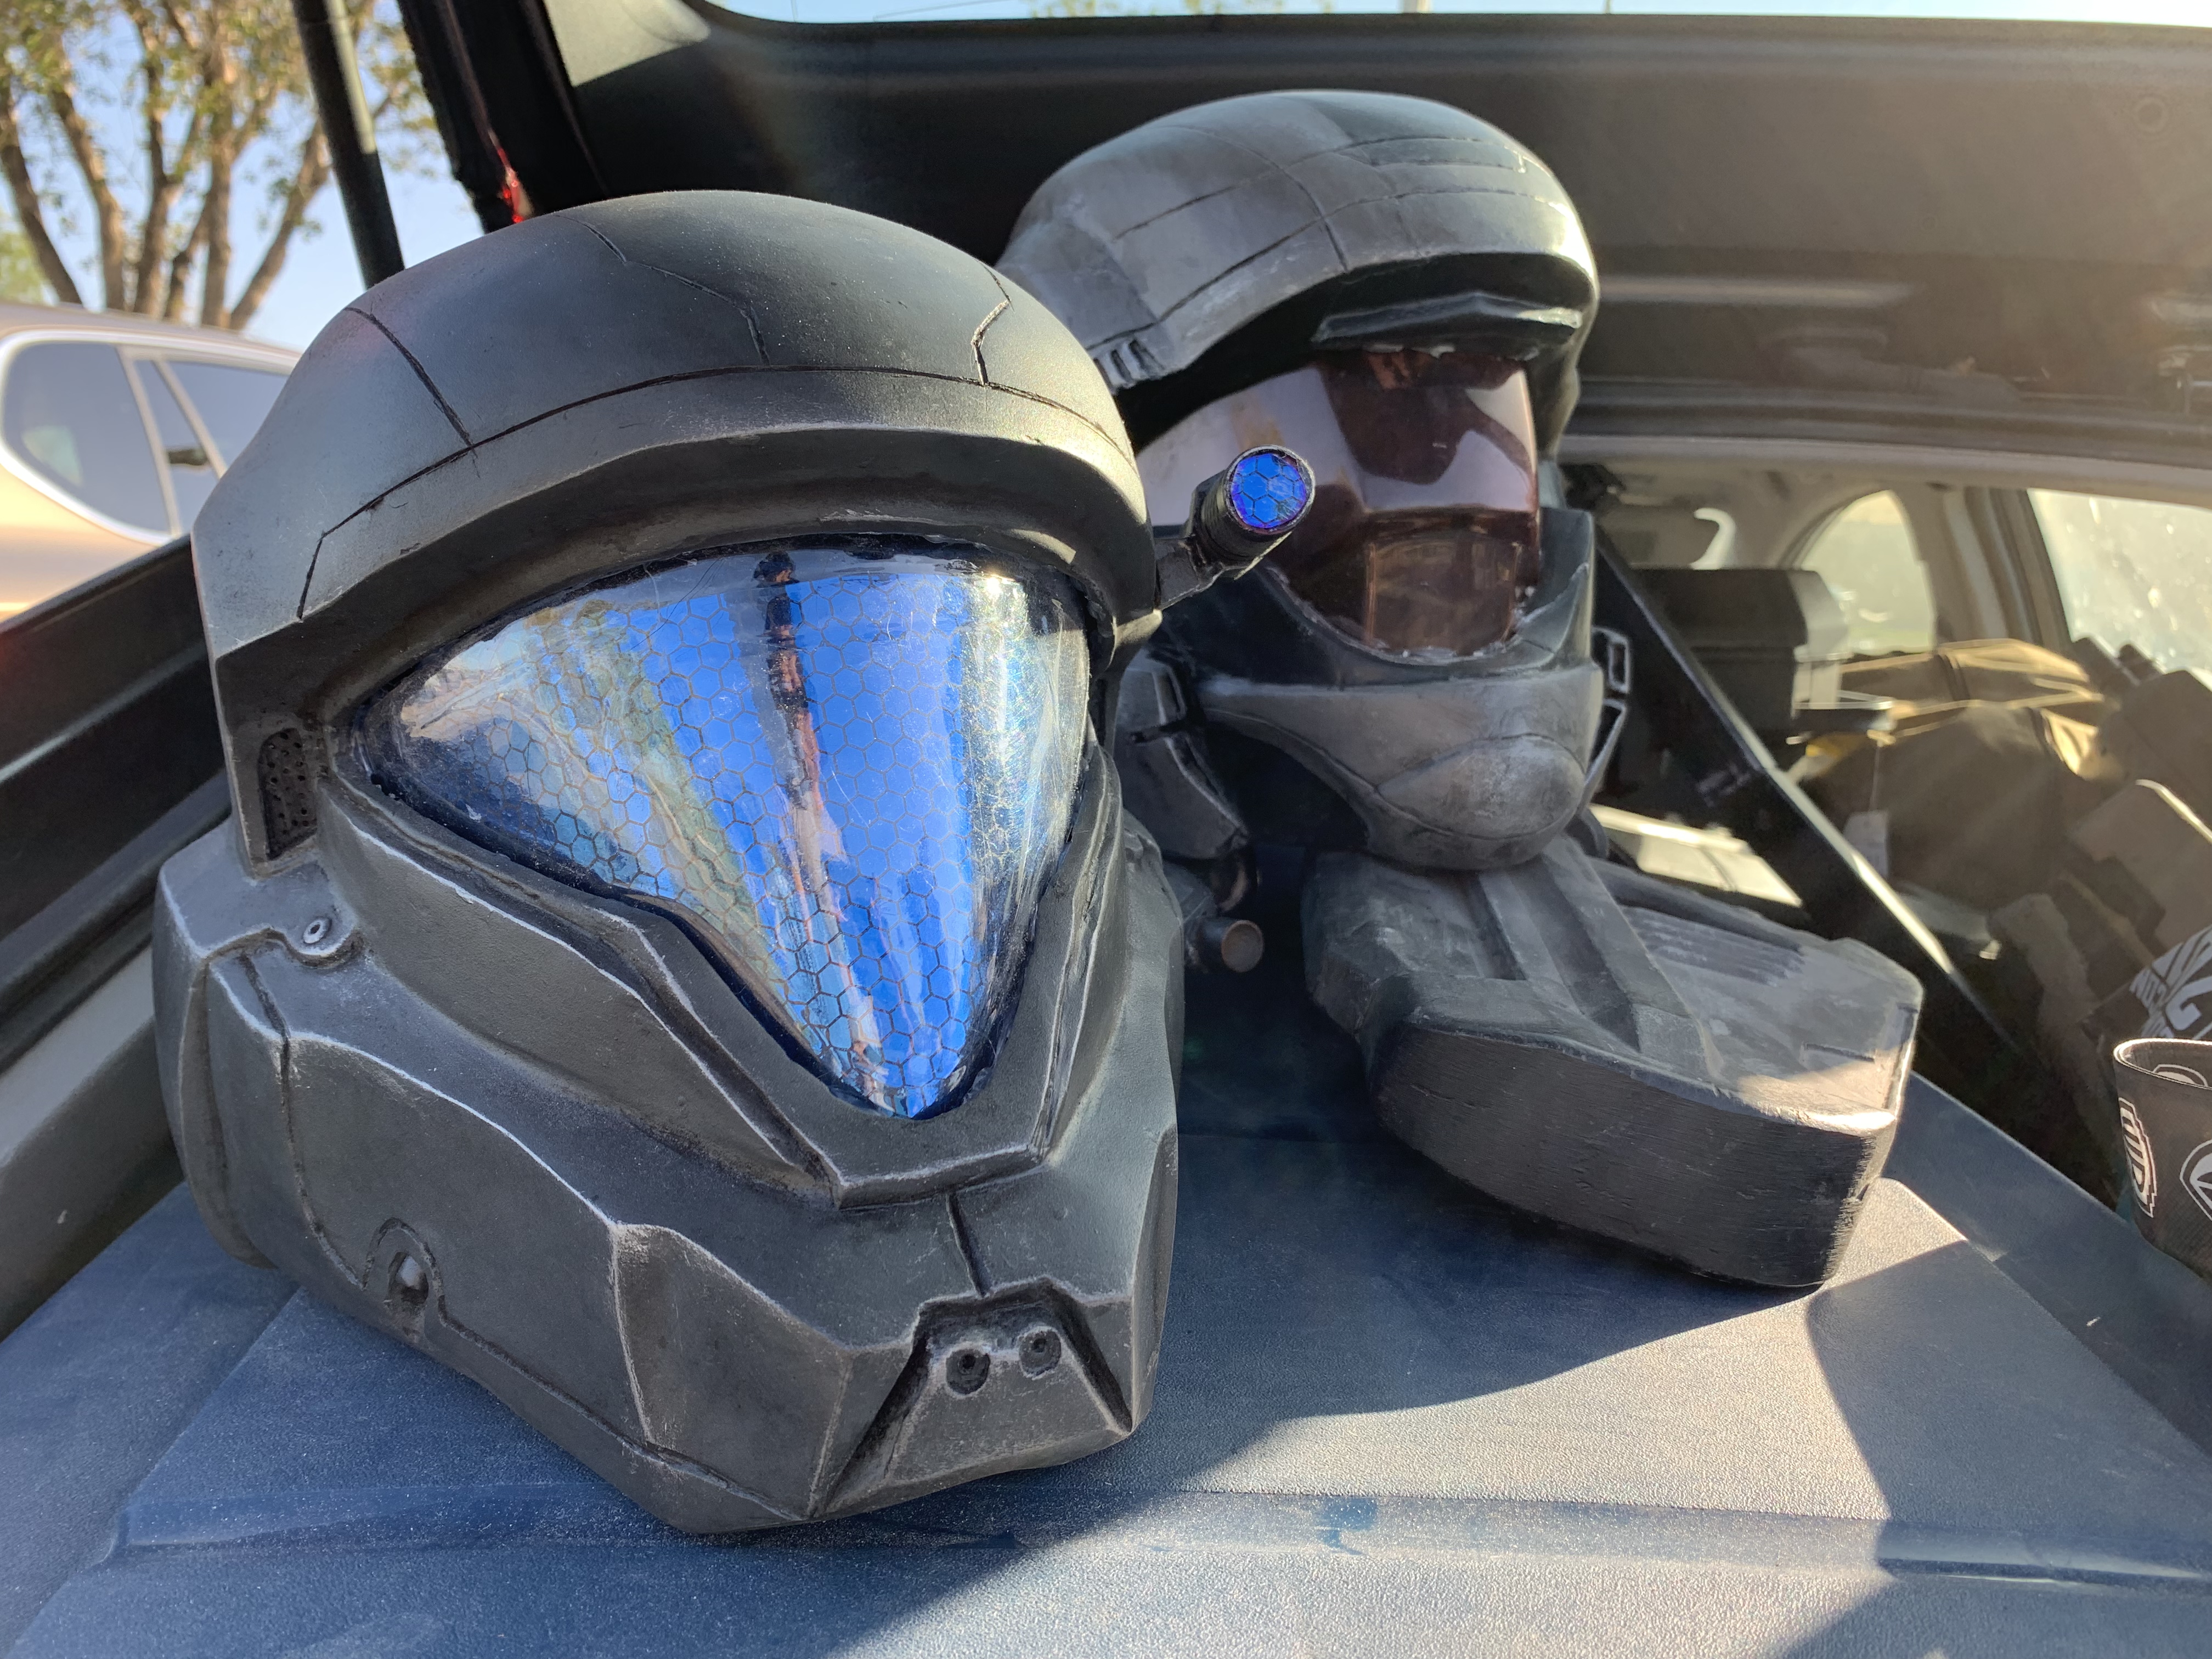 Halo 2 Anniversary ODST - A return to form | Halo Costume and Prop ...